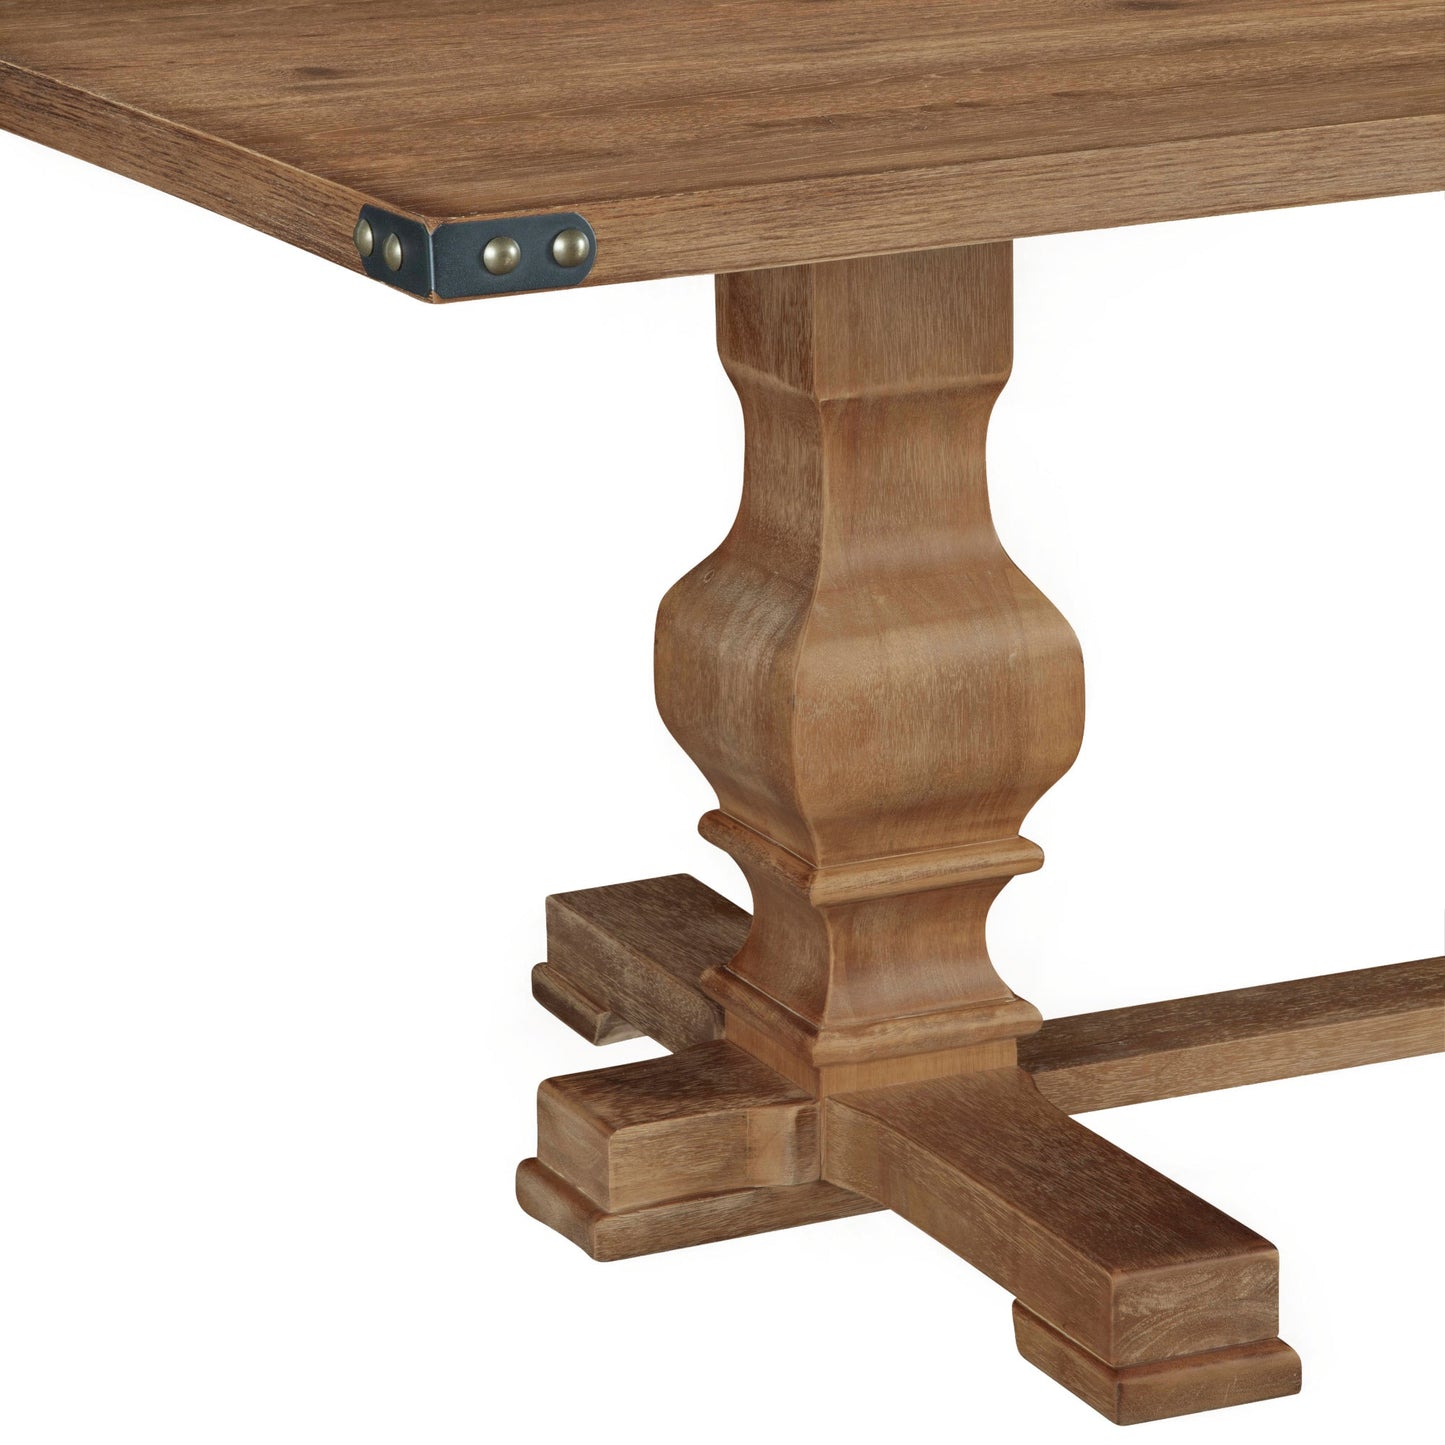 Manchester Dining Table, Natural - Alpine Furniture